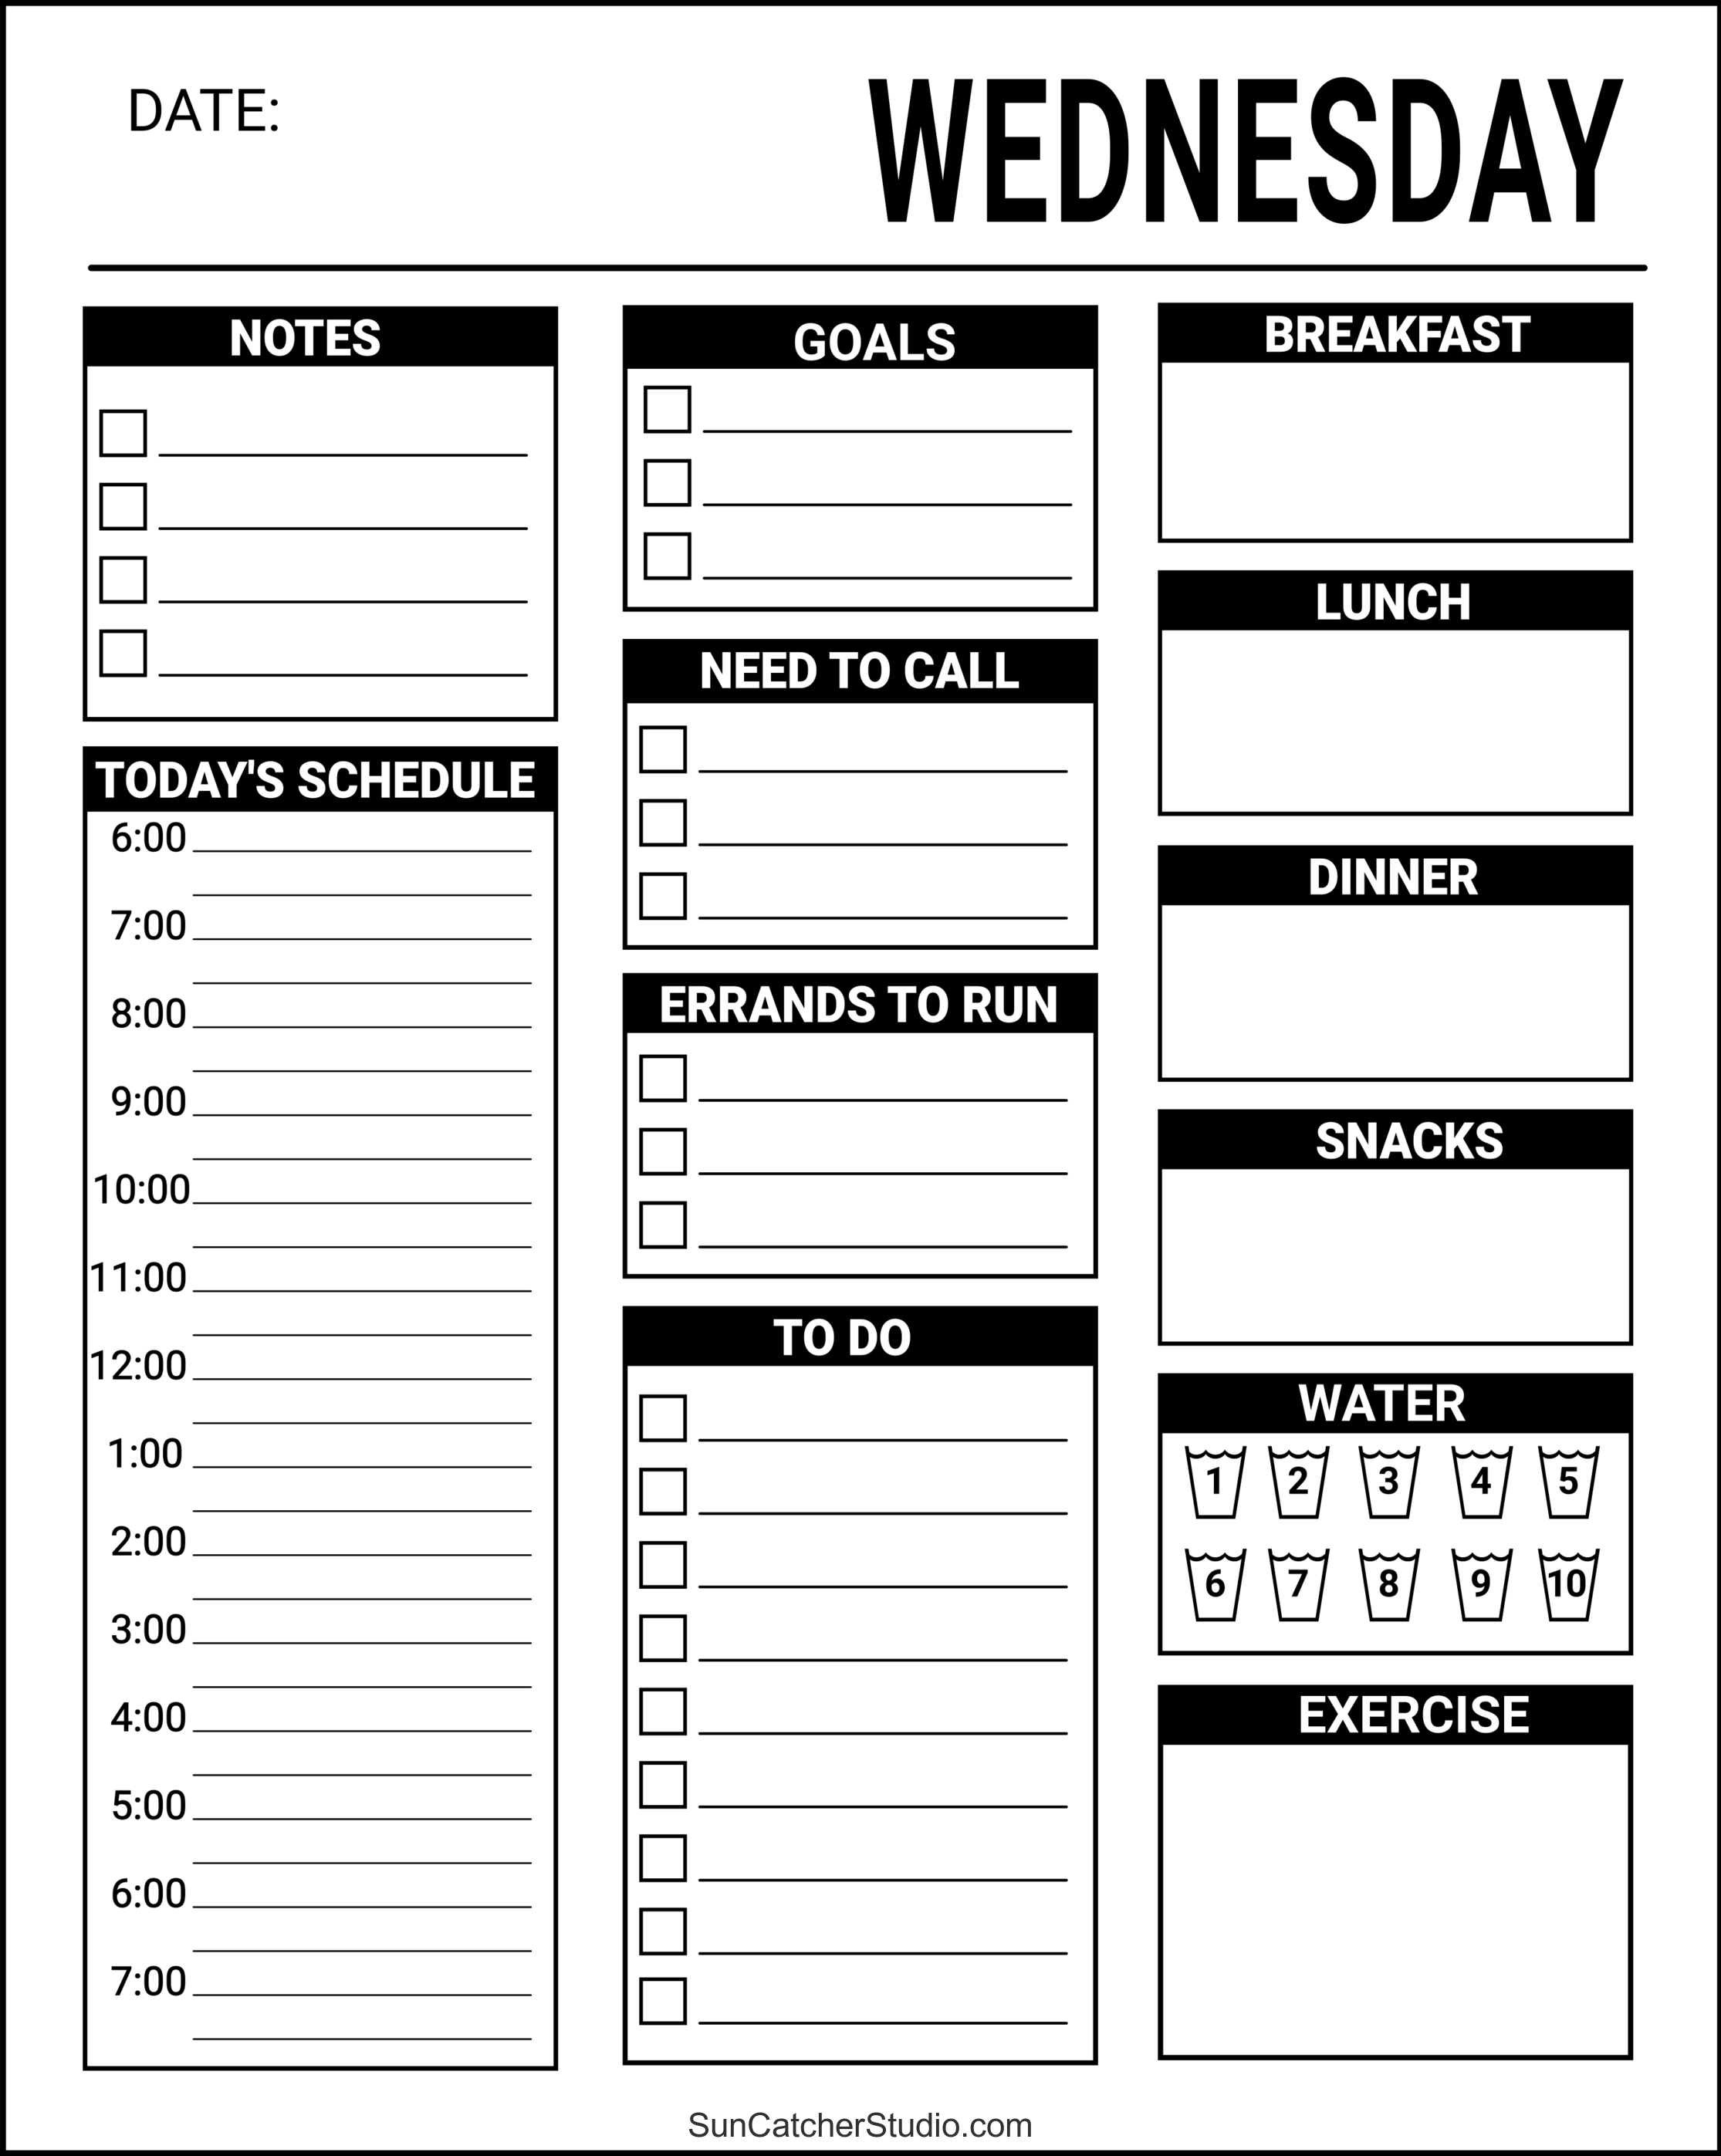 https://suncatcherstudio.com/uploads/printables/daily-planners/pdf-png/printable-daily-planner-template-wednesday-010101-fefefe.png